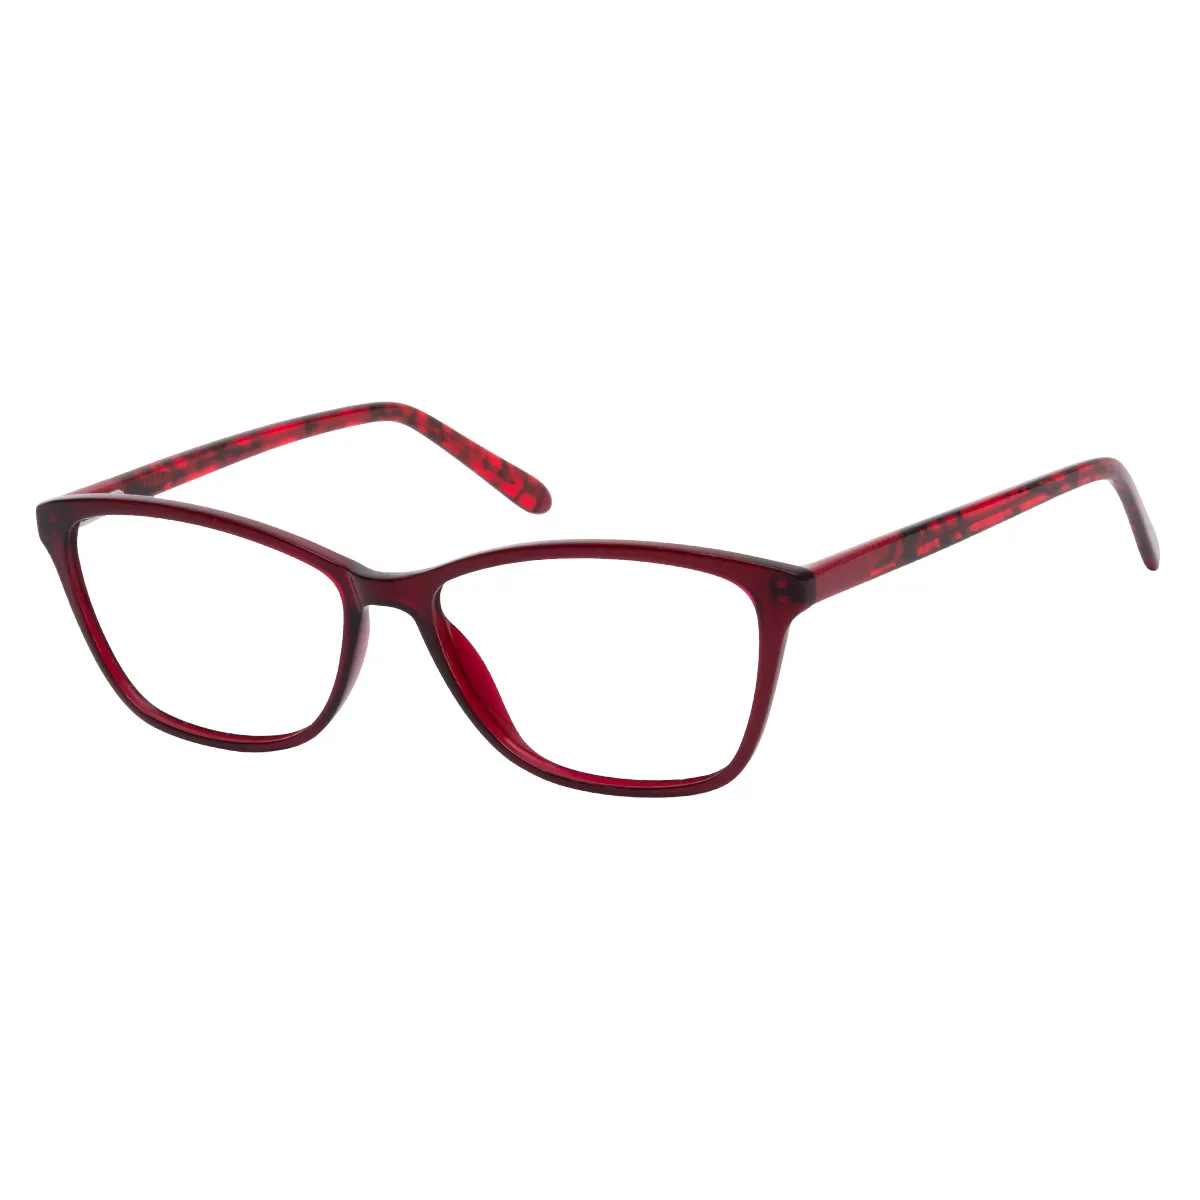 Tyla - Rectangle Red Glasses for Women